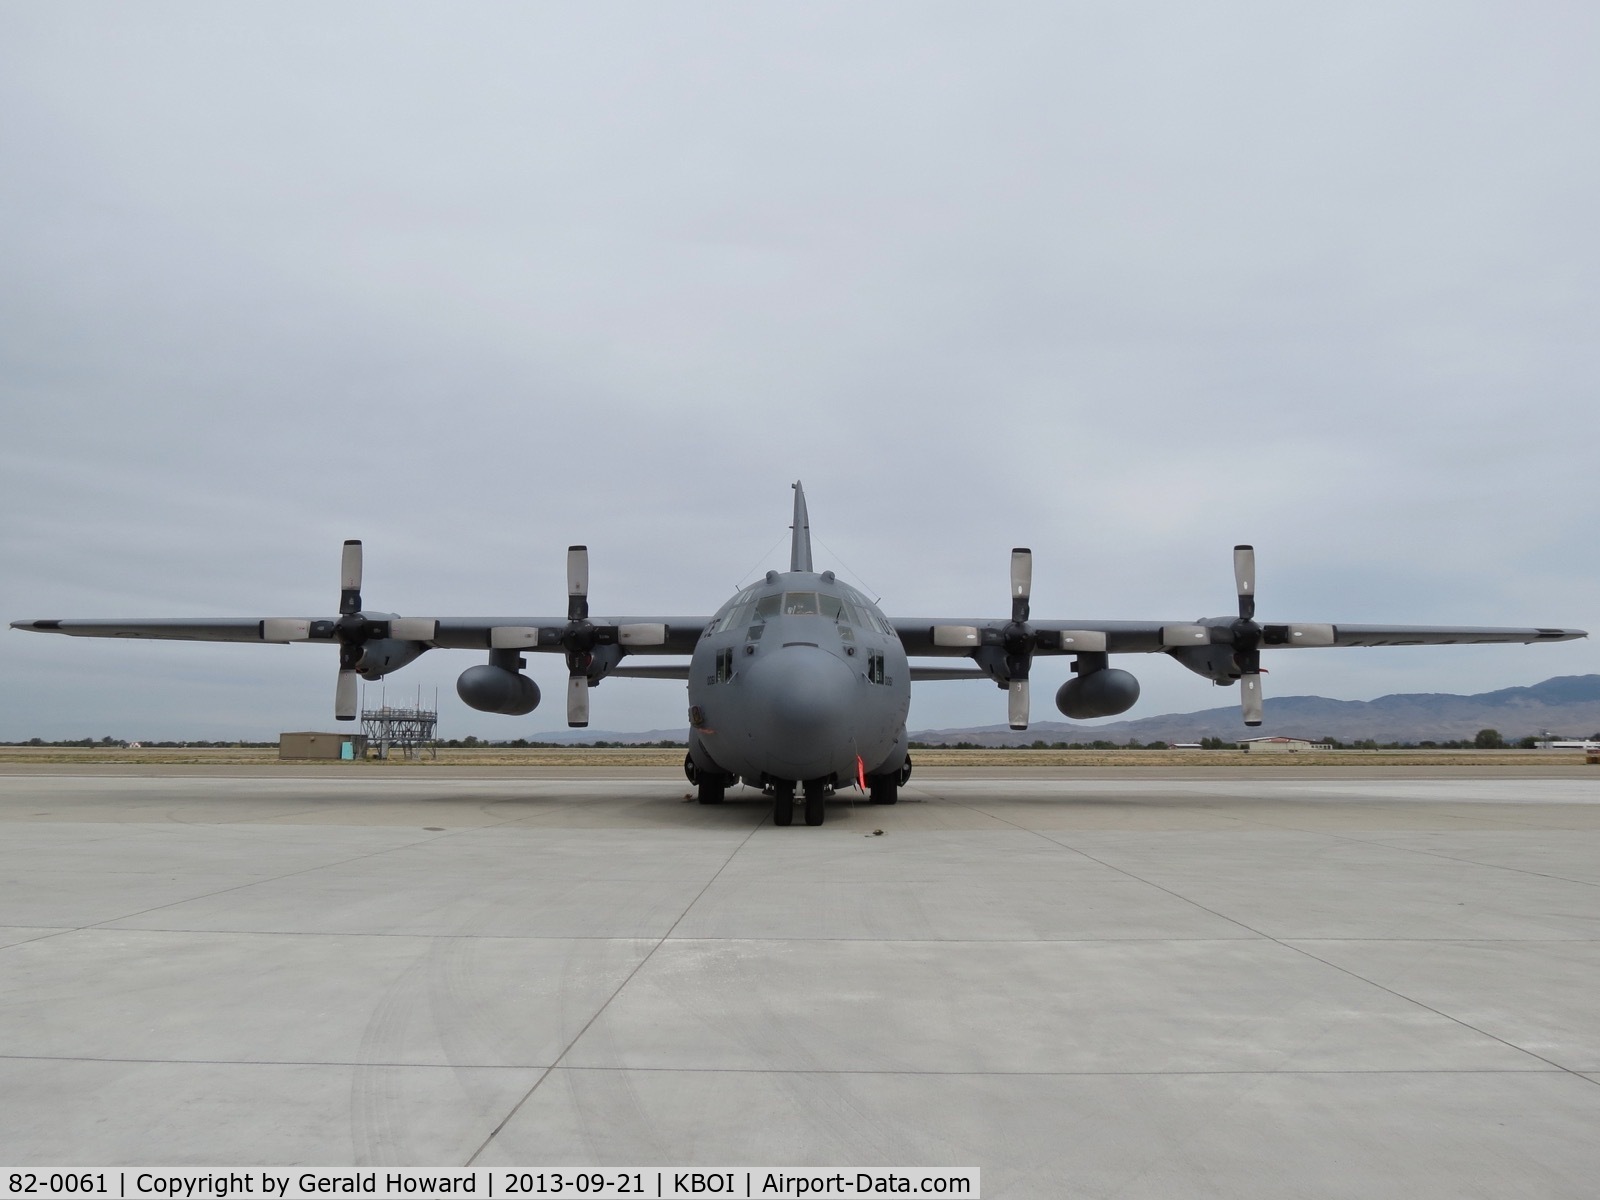 82-0061, 1982 Lockheed C-130H Hercules C/N 382-4982, 144th Airlift Sq., Alaska ANG. Deactivated in march 2017.